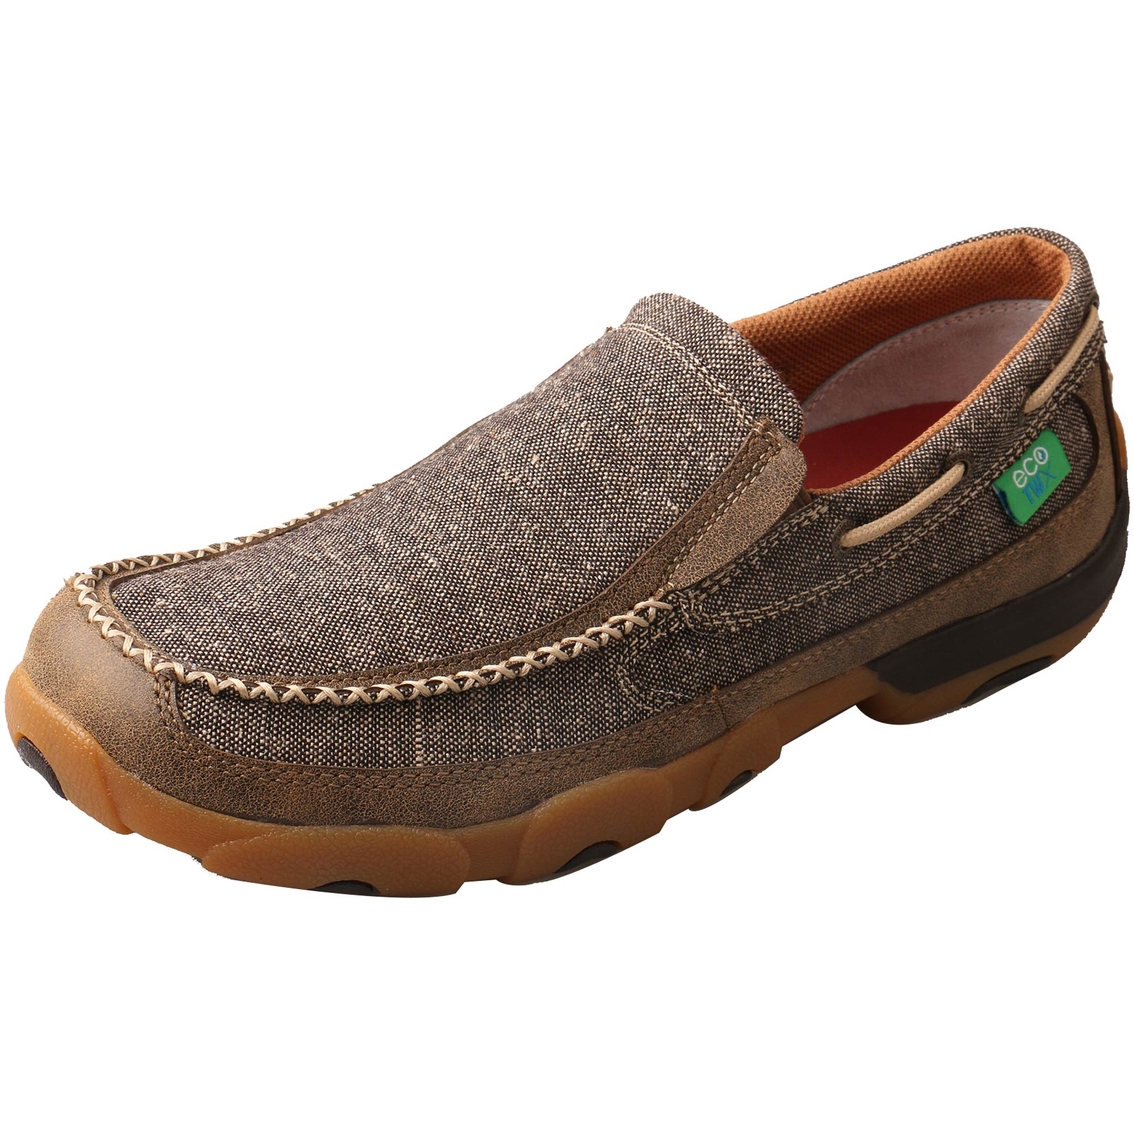 Twisted X Men's Slip-On Driving Moc Dust Shoes - Image 7 of 7